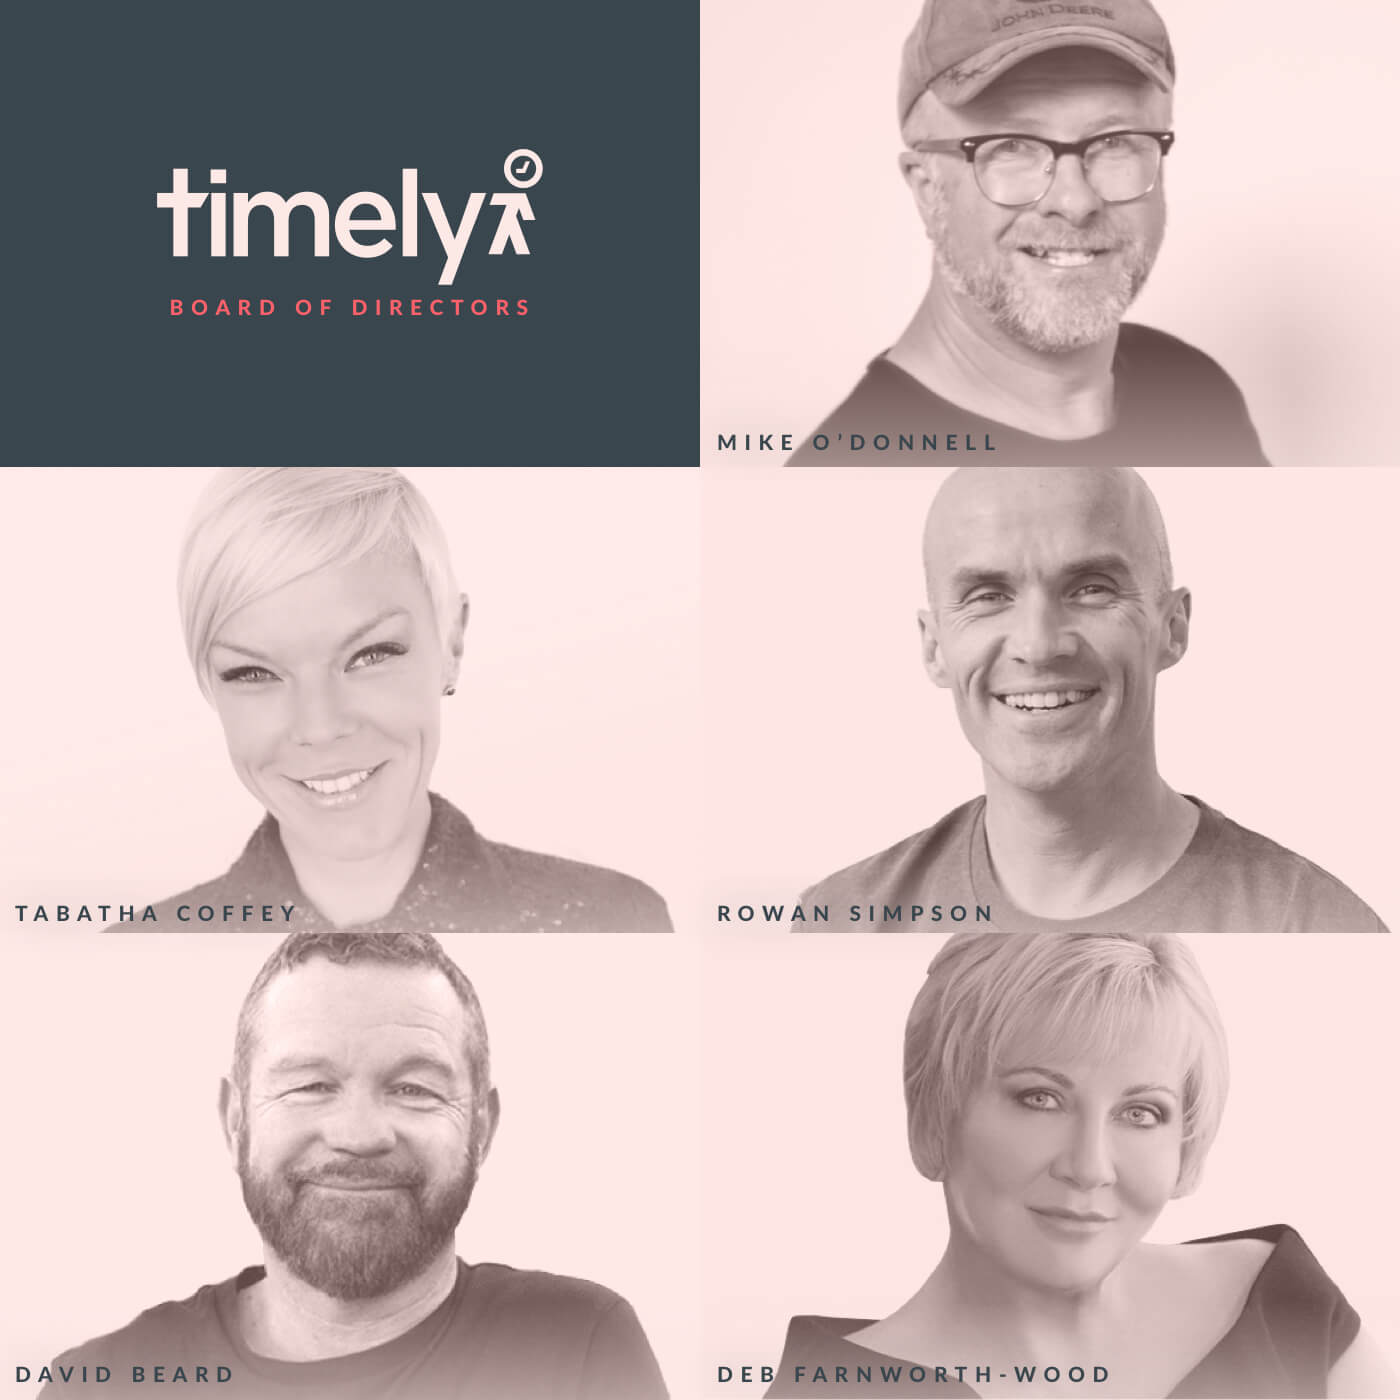 Timely's Board of Directors